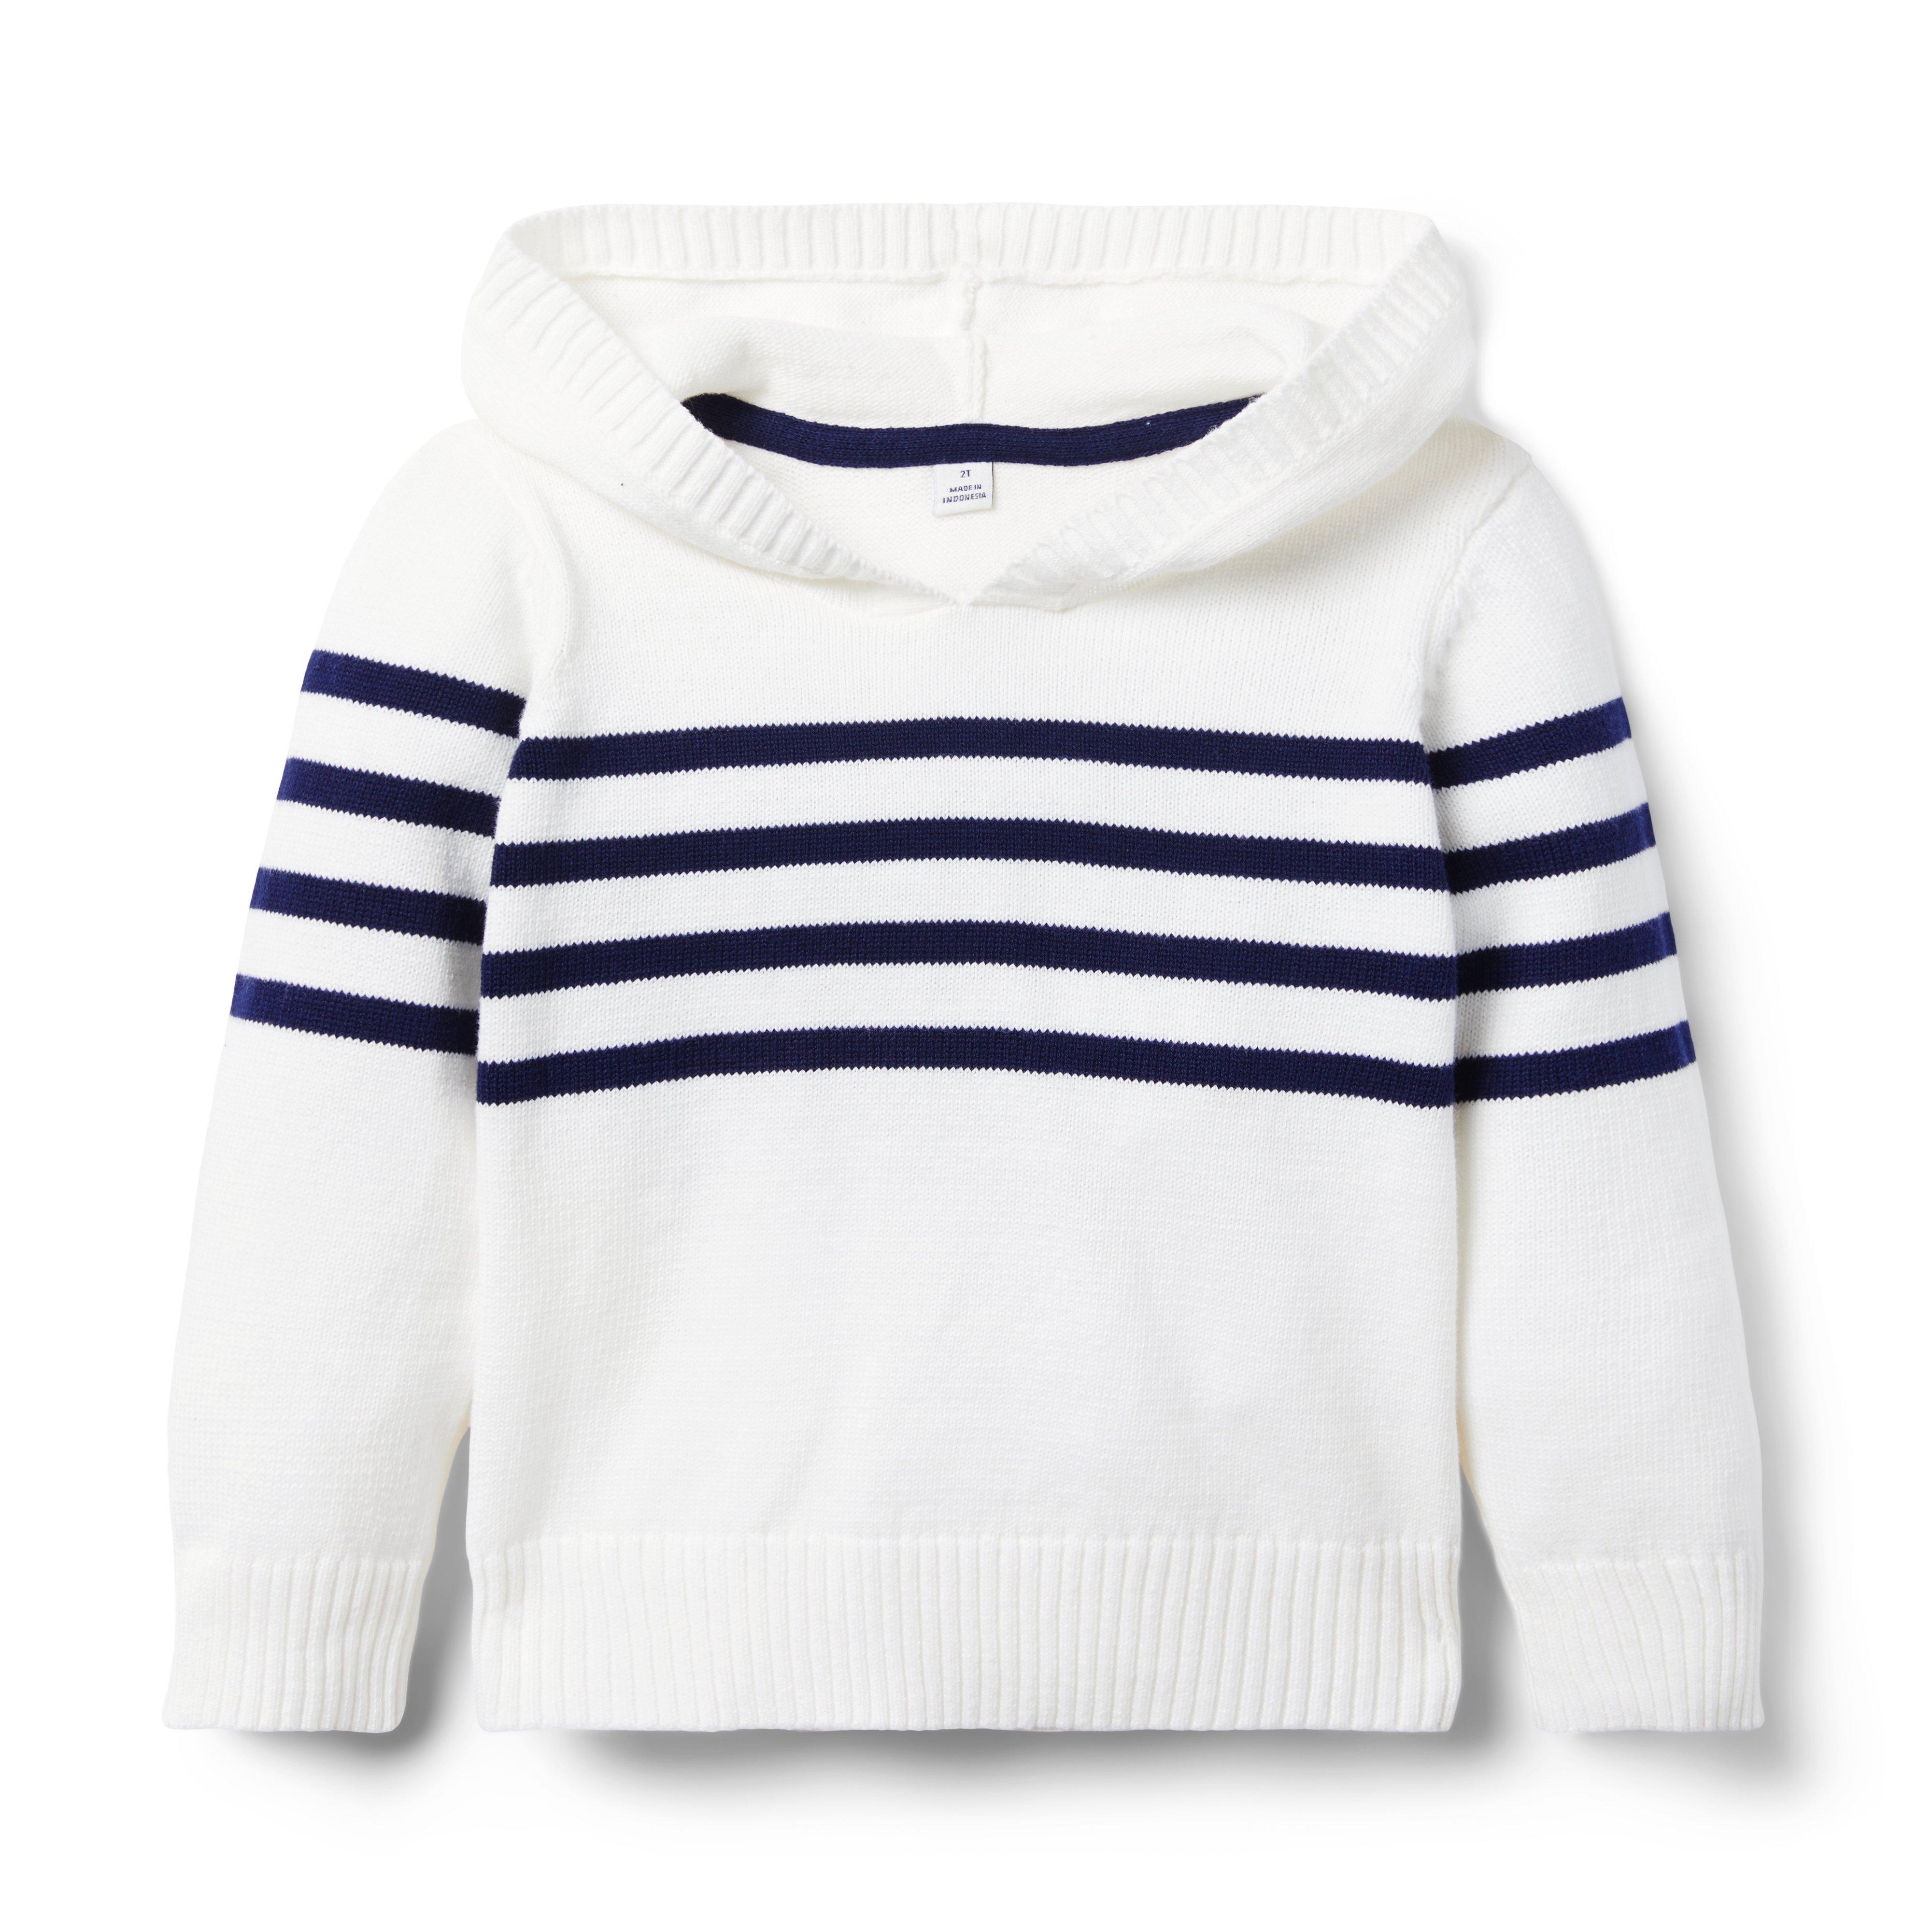 The Stripe Hooded Sweater